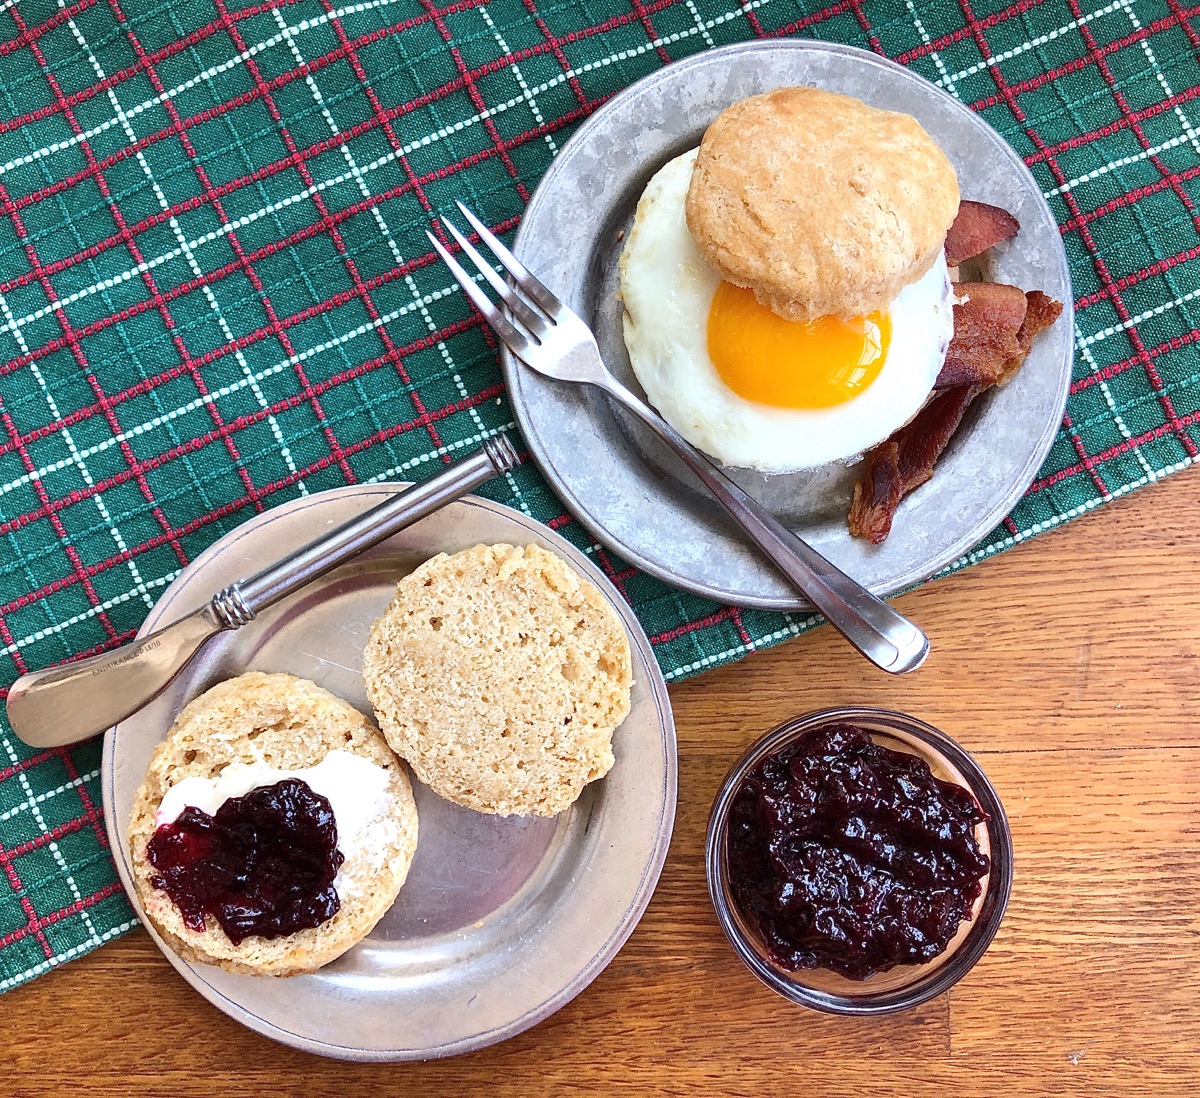 Whole wheat sourdough biscuits made into a breakfast sandwich, and simply spread with butter and jam.